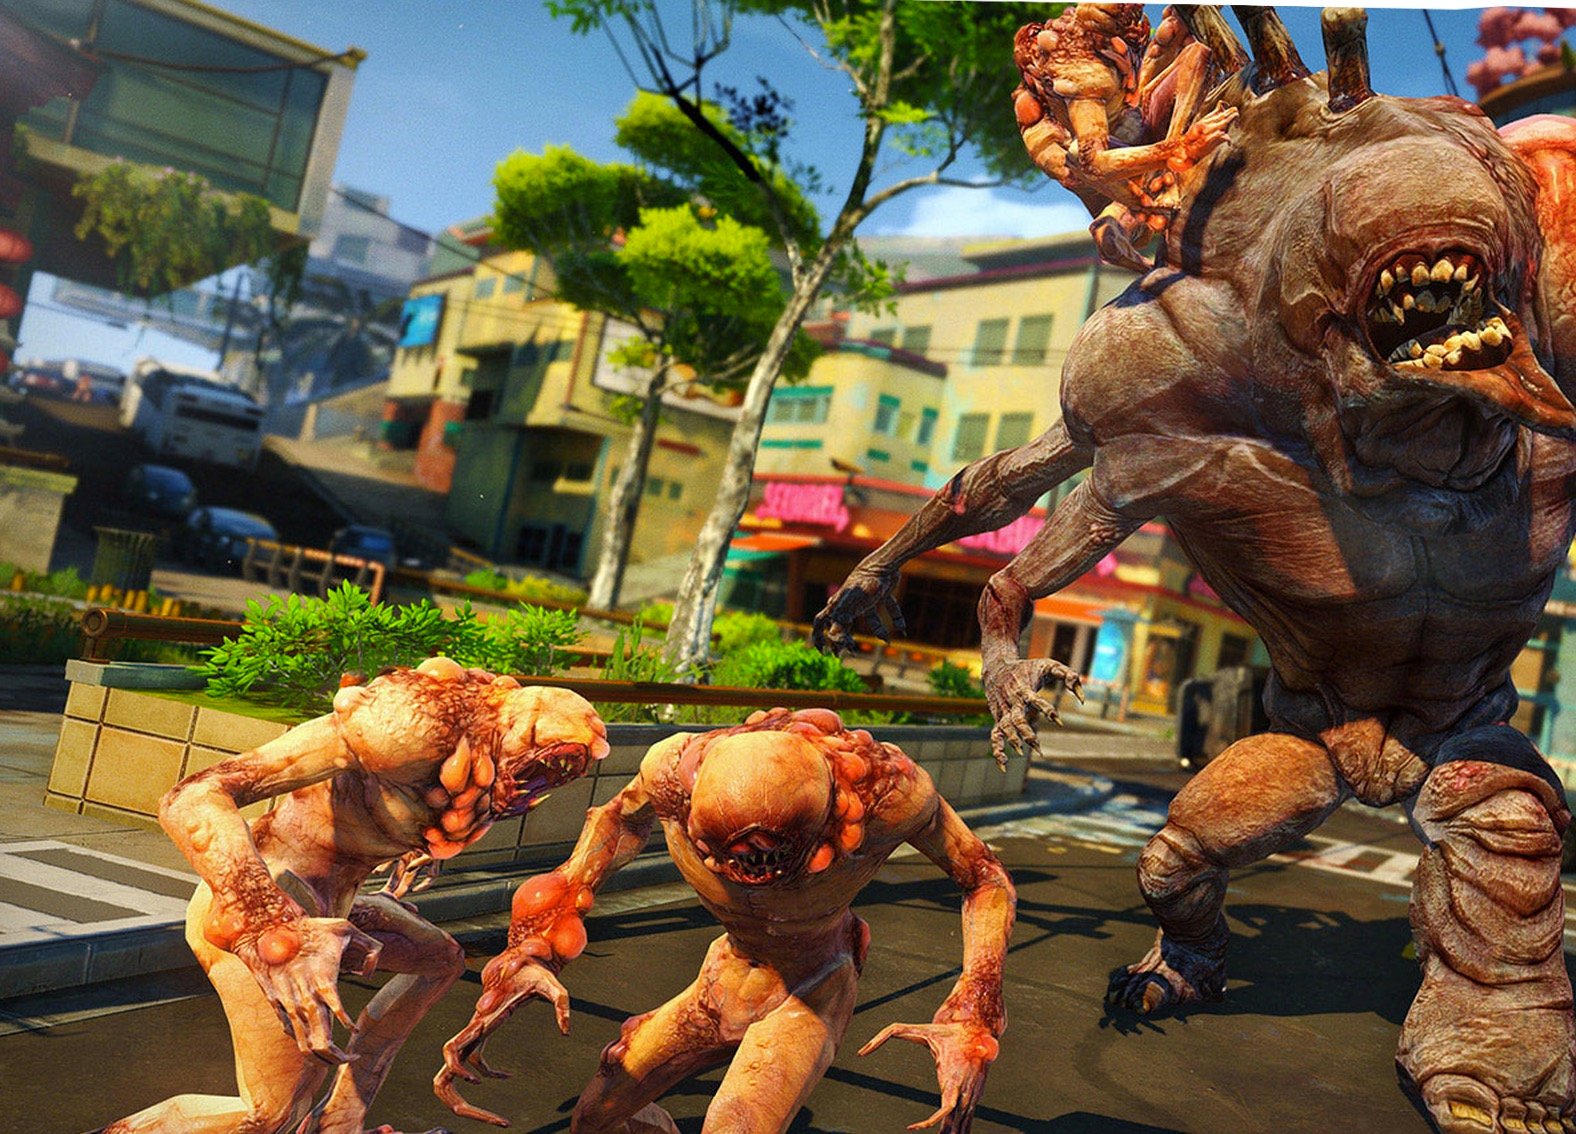 You can find a few Sunset Overdrive deals, but there are not many.